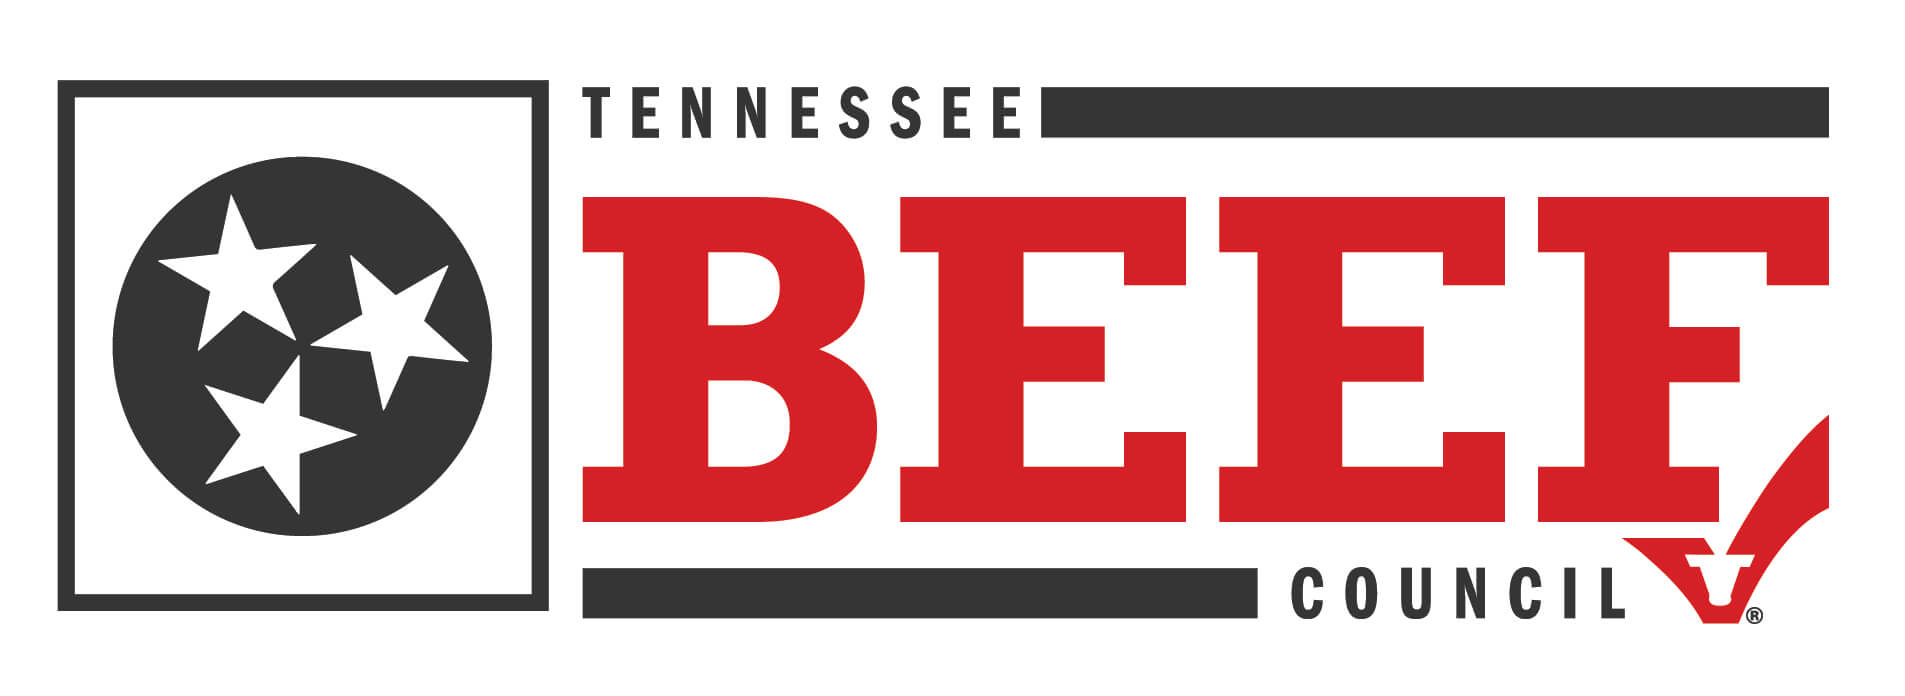 Tennessee Beef Councel